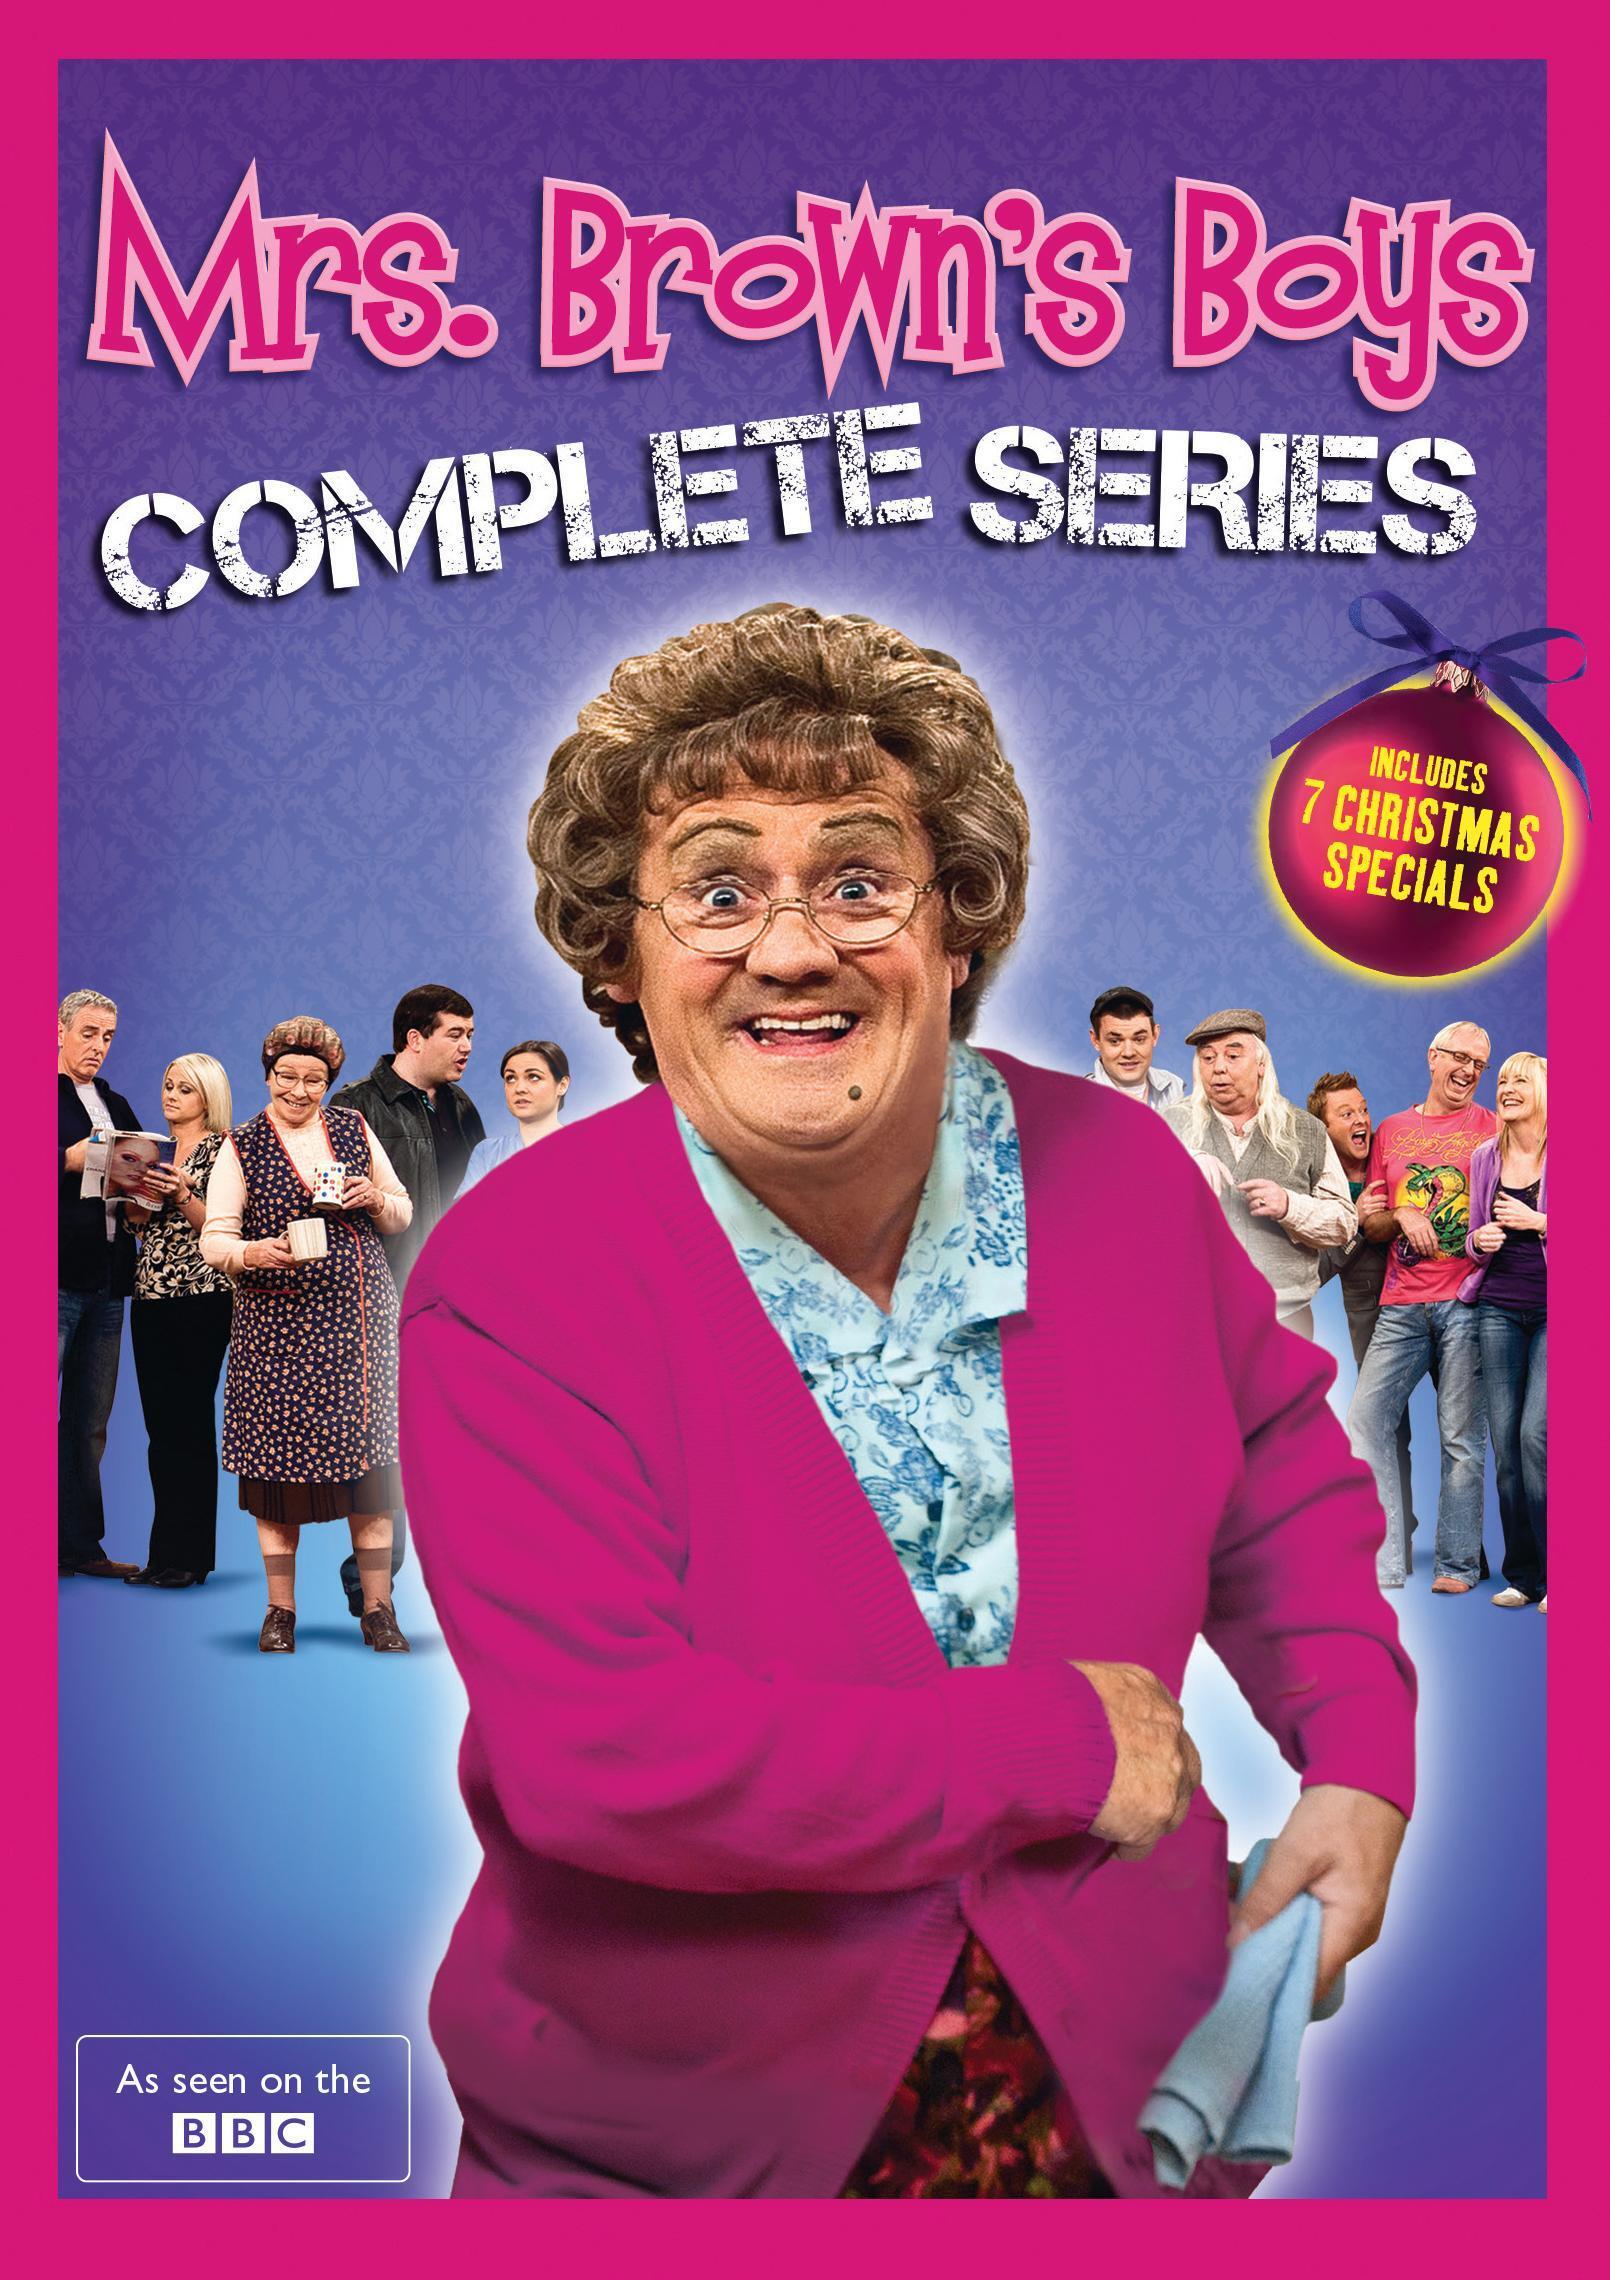 Mrs Brown's Boys: Complete Series (Box Set) - DVD   - Comedy Television On DVD - TV Shows On GRUV